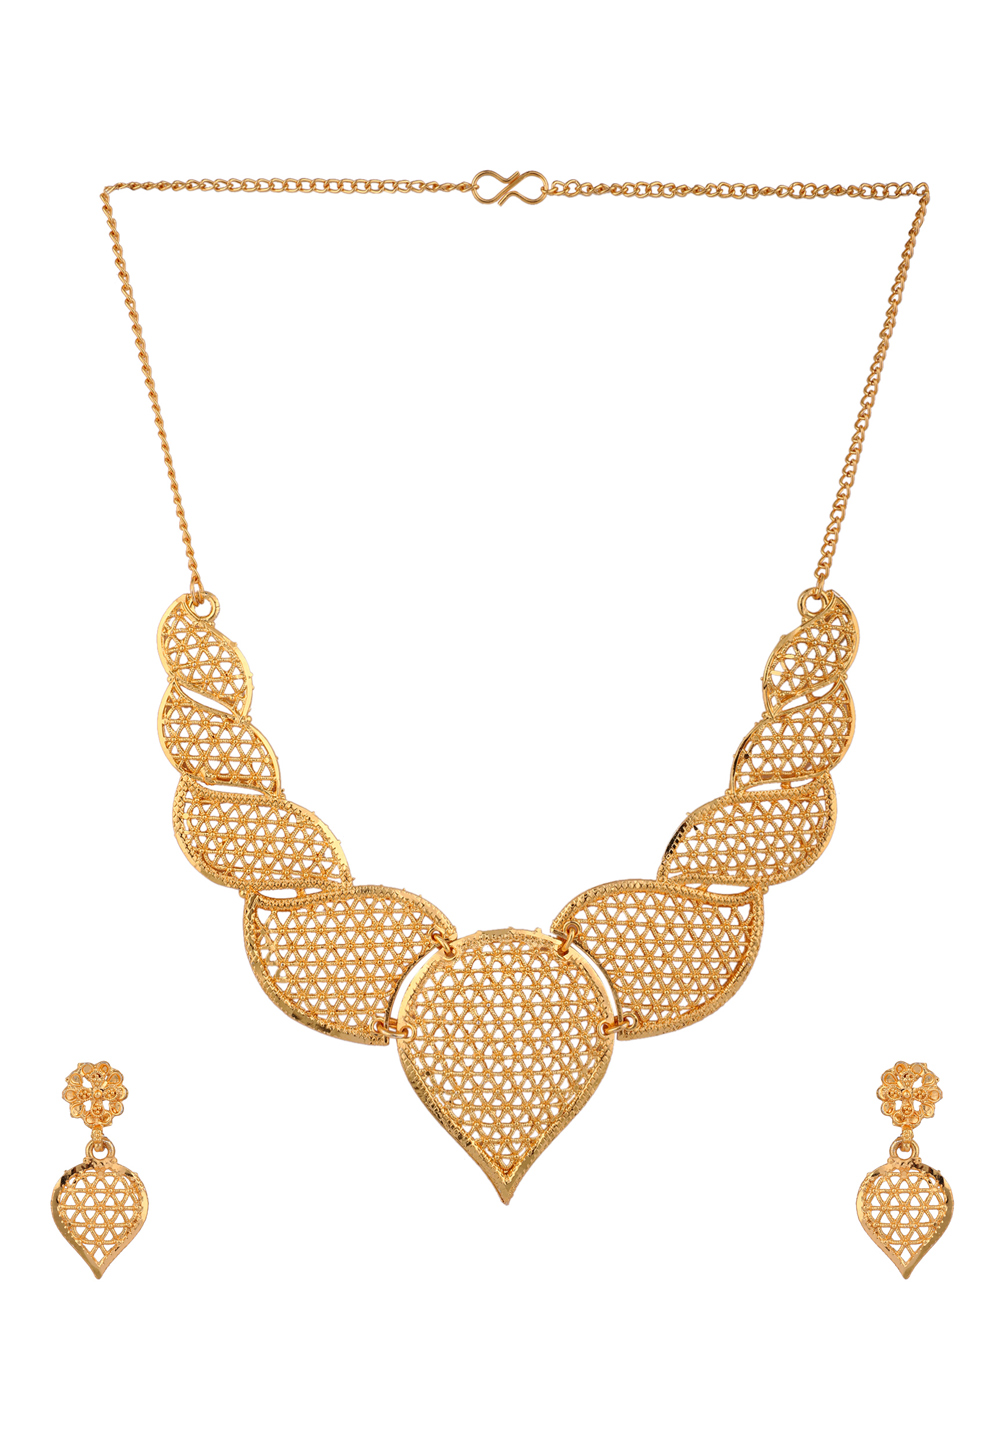 Golden Alloy Necklace Set With Earrings 224658